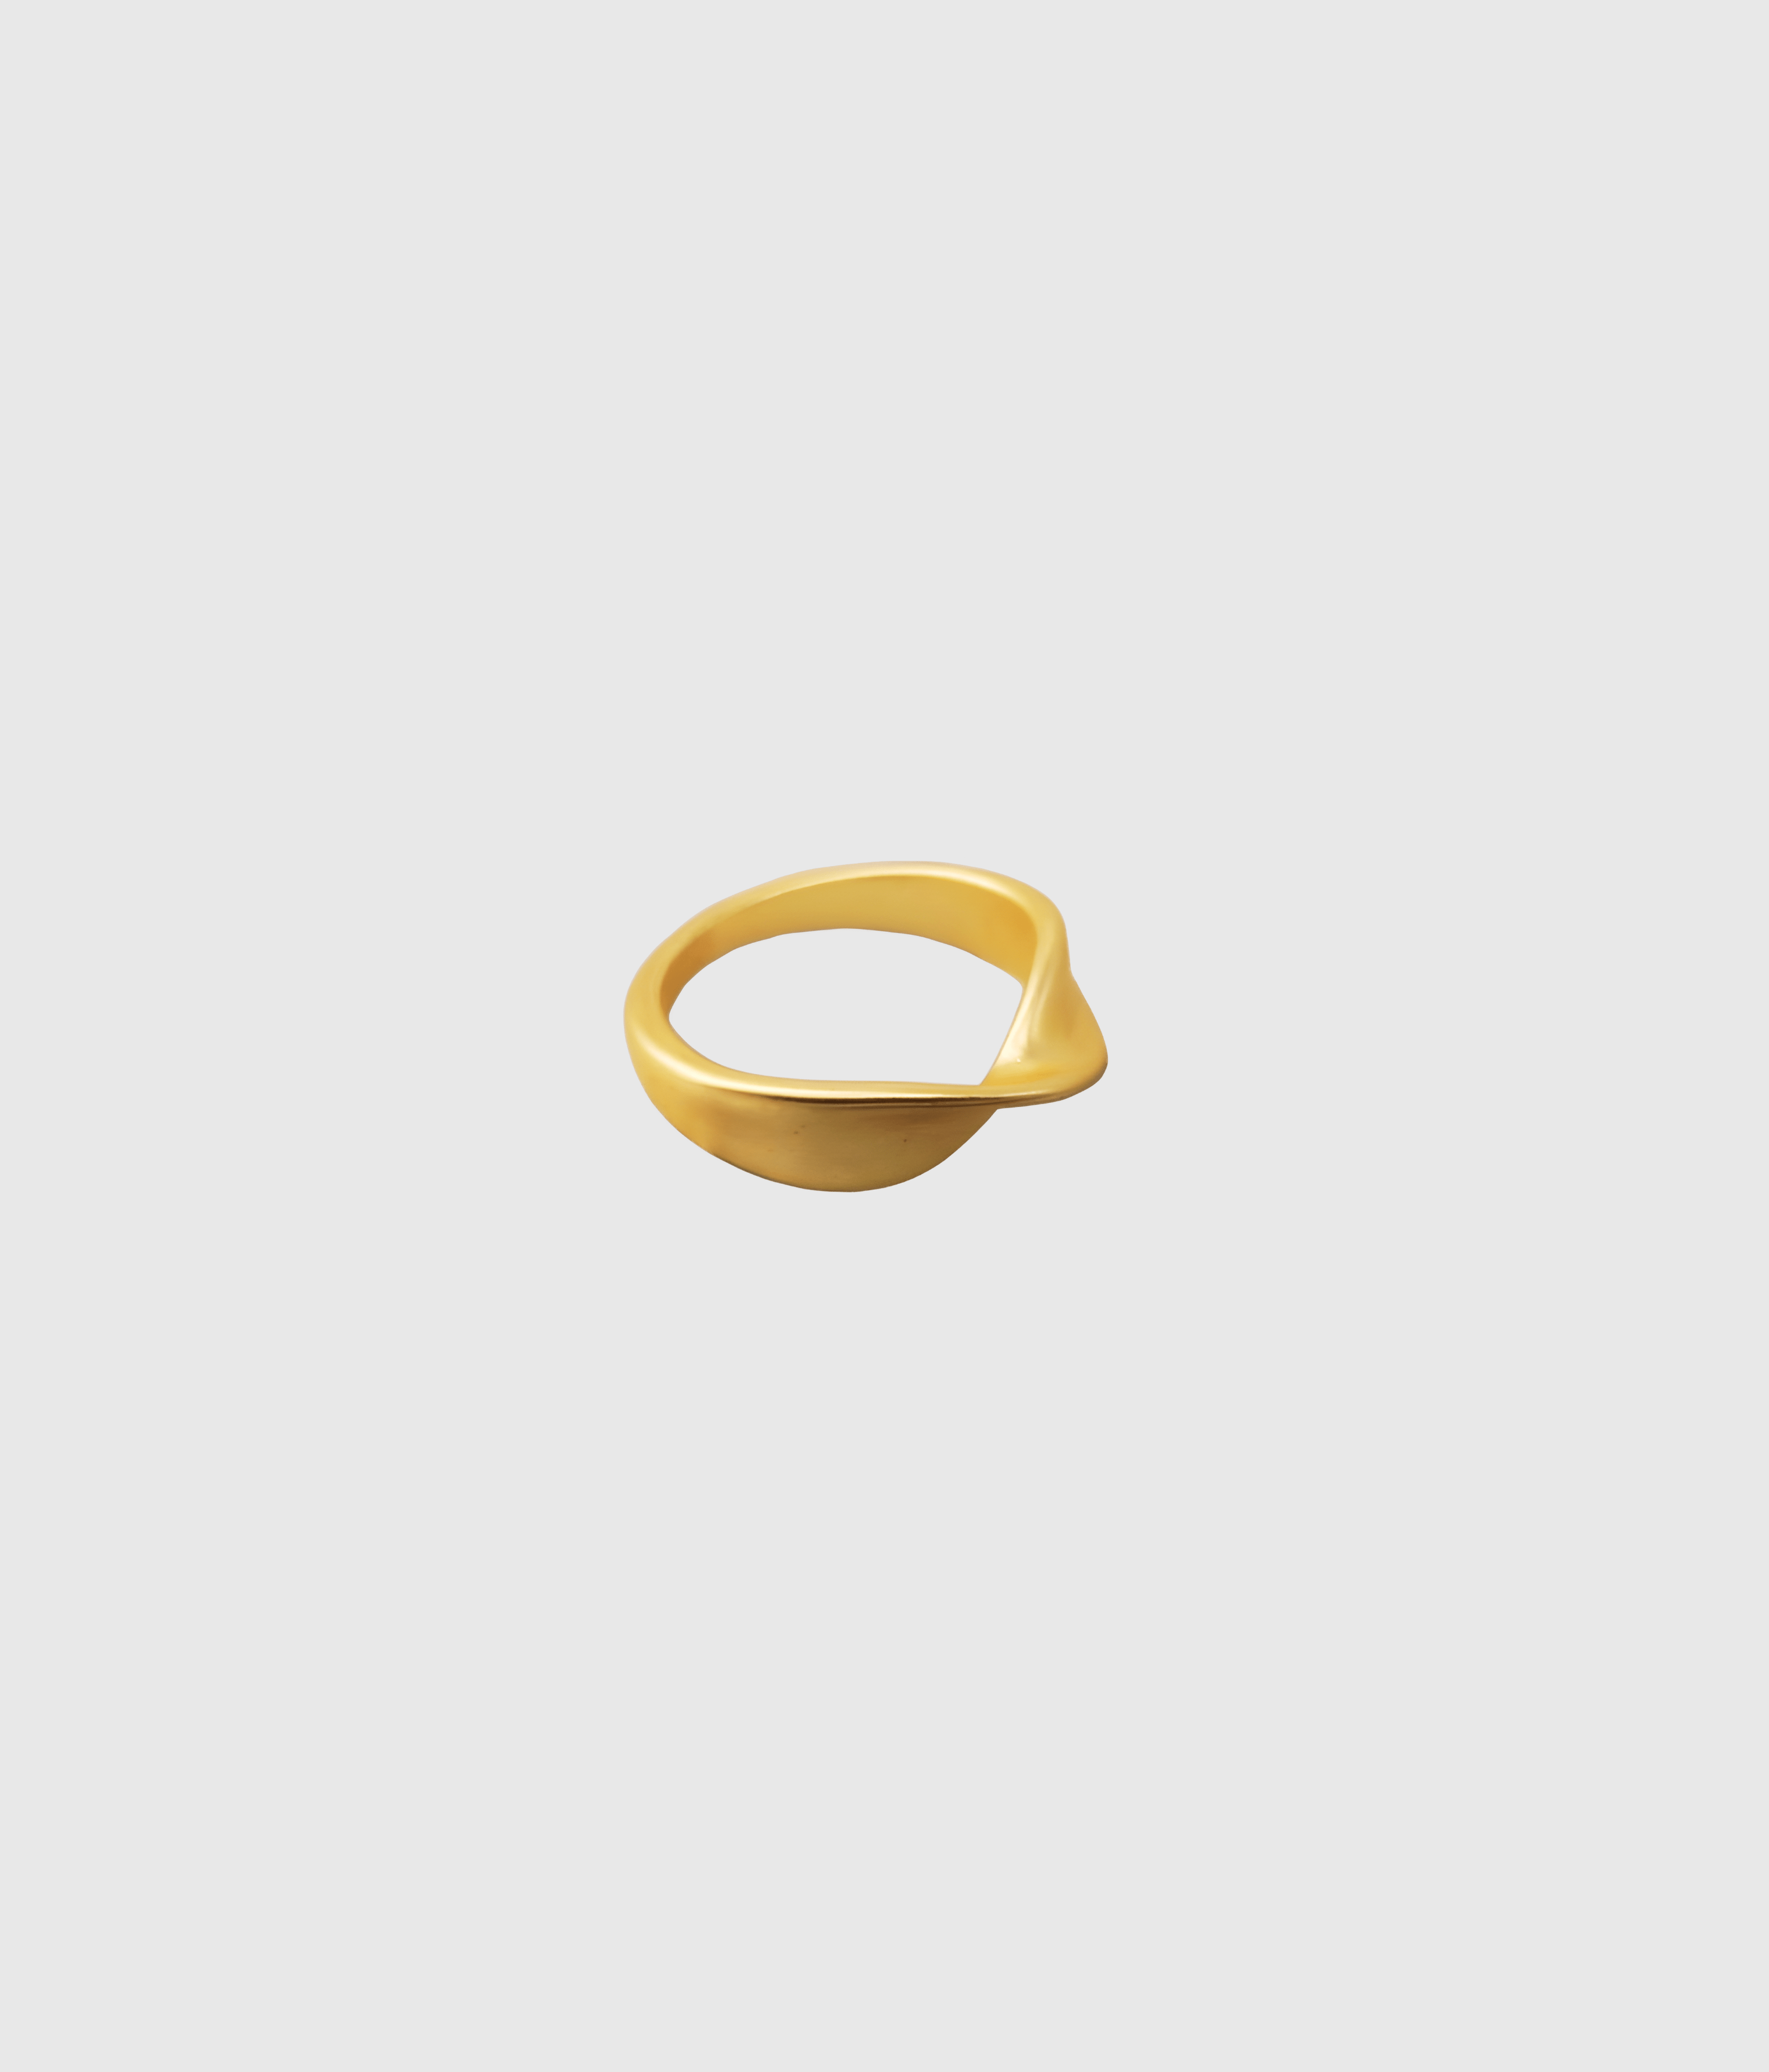 Wide Cigar Band in 14K Gold Vermeil or Rhodium Over Sterling Silver 7mm  Wide Wide Flat Band Unisex Ring Men's and Women's by Trove - Etsy